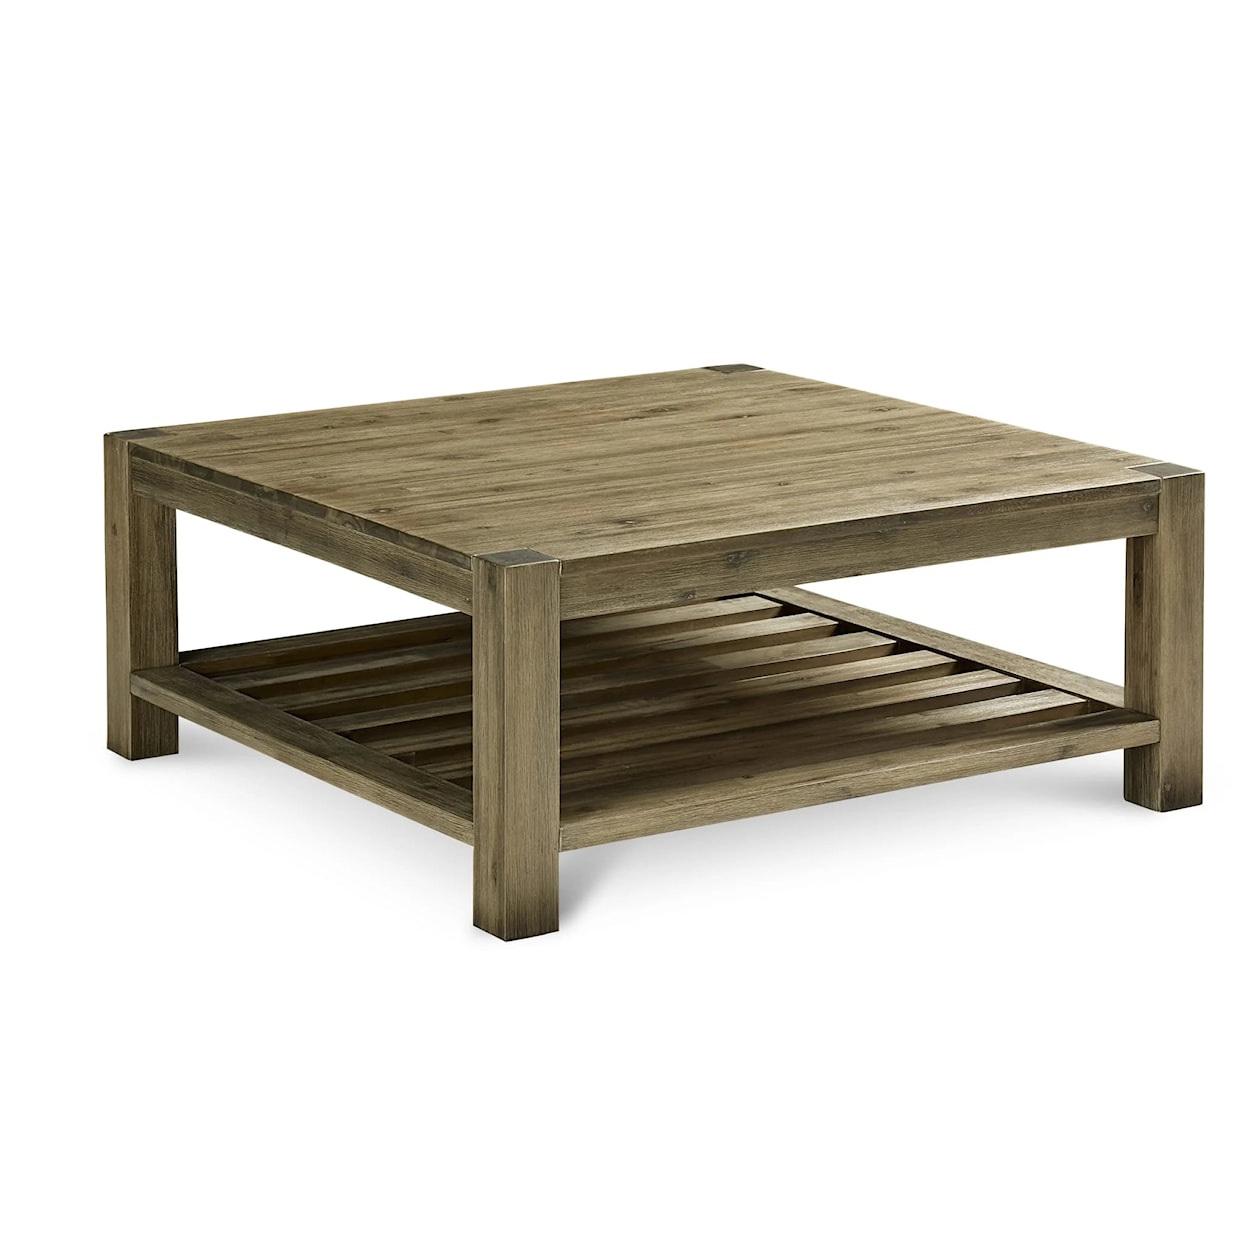 Modus International Canyon Washed Grey Solid Wood Square Coffee Table